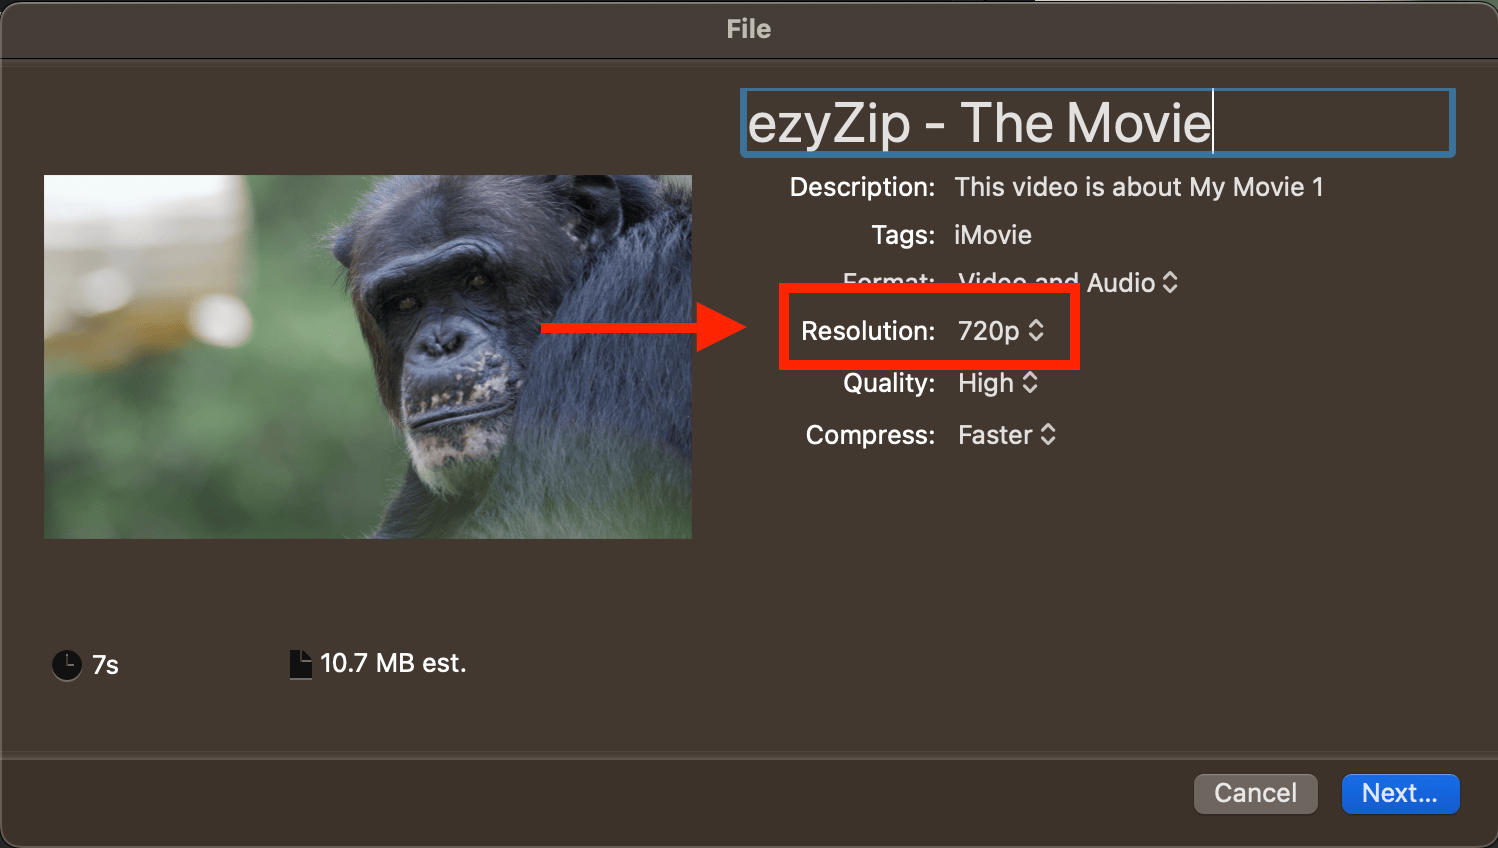 How To Compress Video Files: Reduced resolution